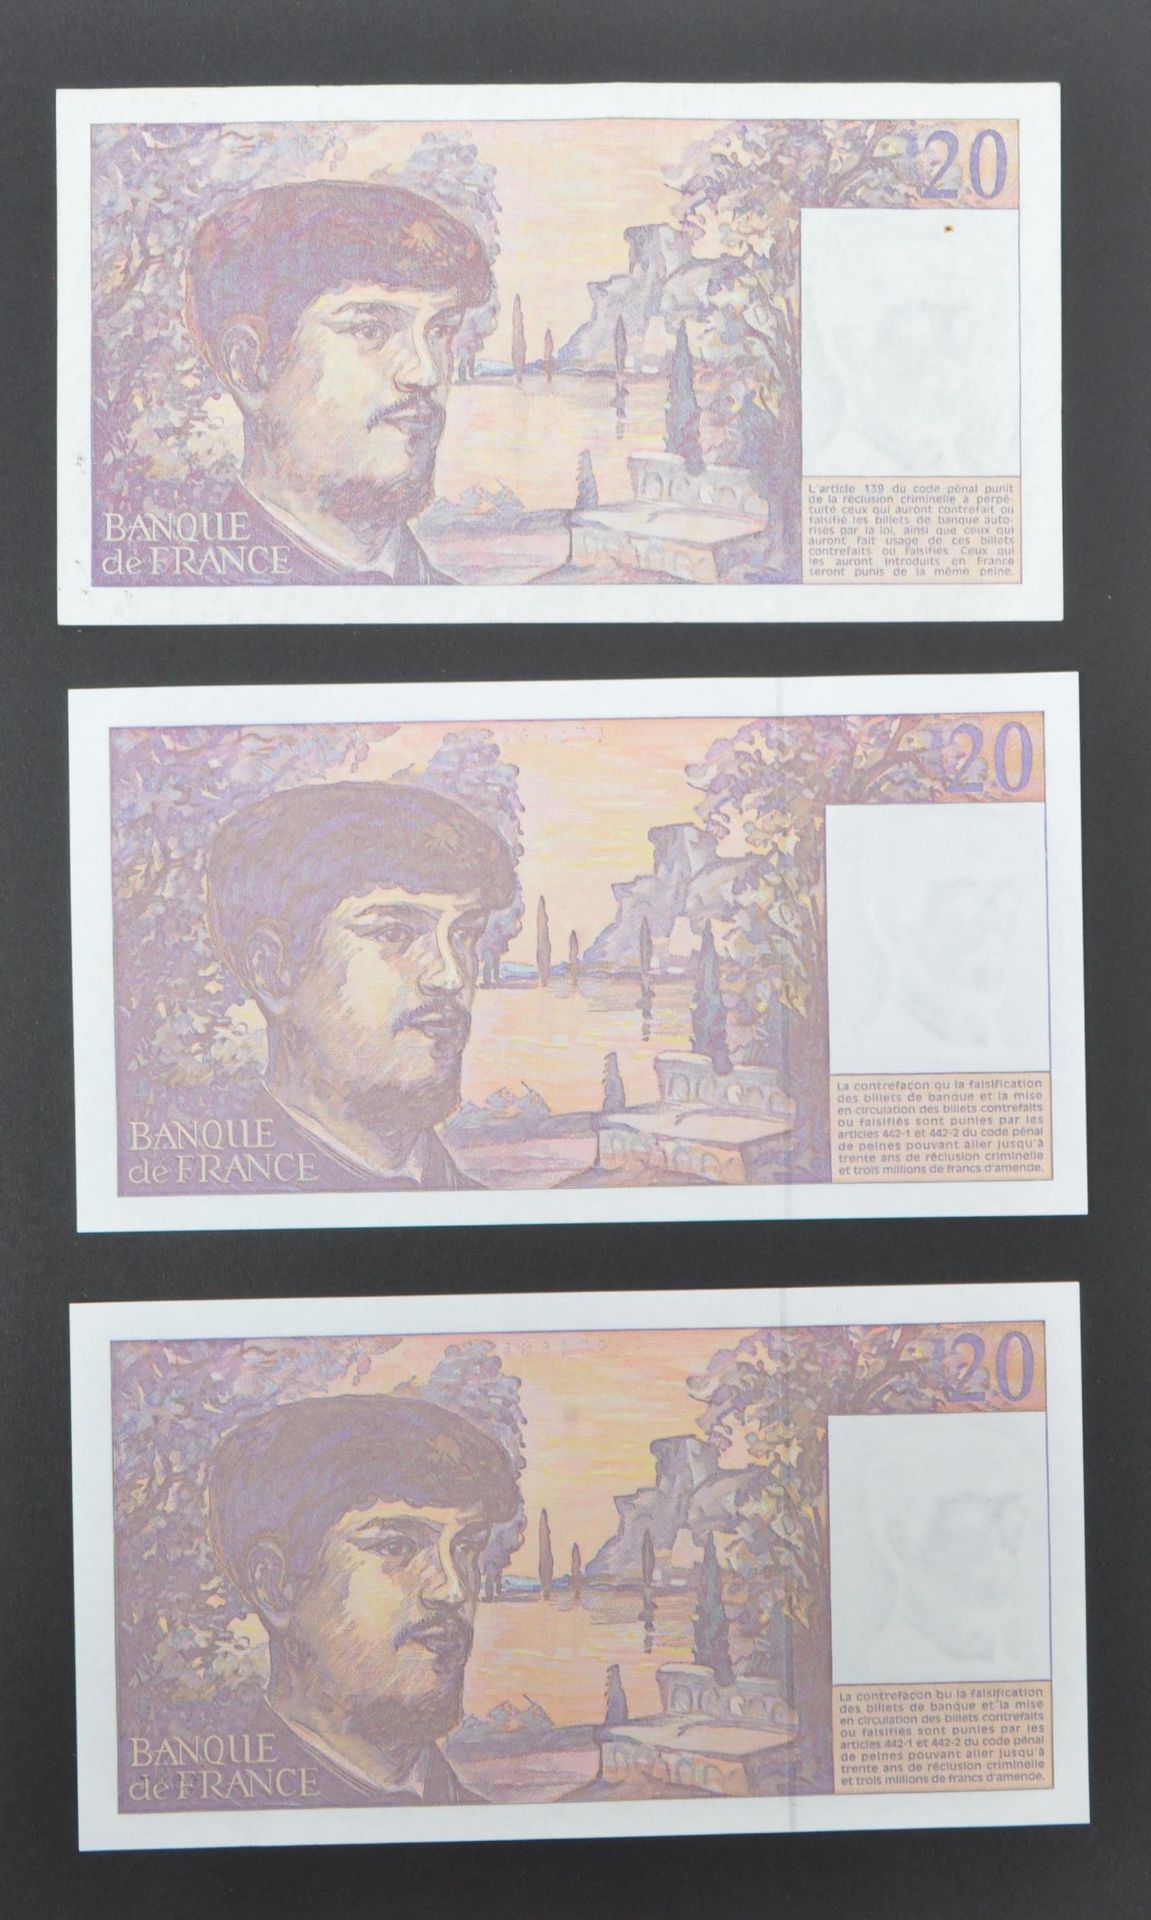 INTERNATIONAL MOSTLY UNCIRCULATED BANK NOTES - EUROPE - Image 8 of 30